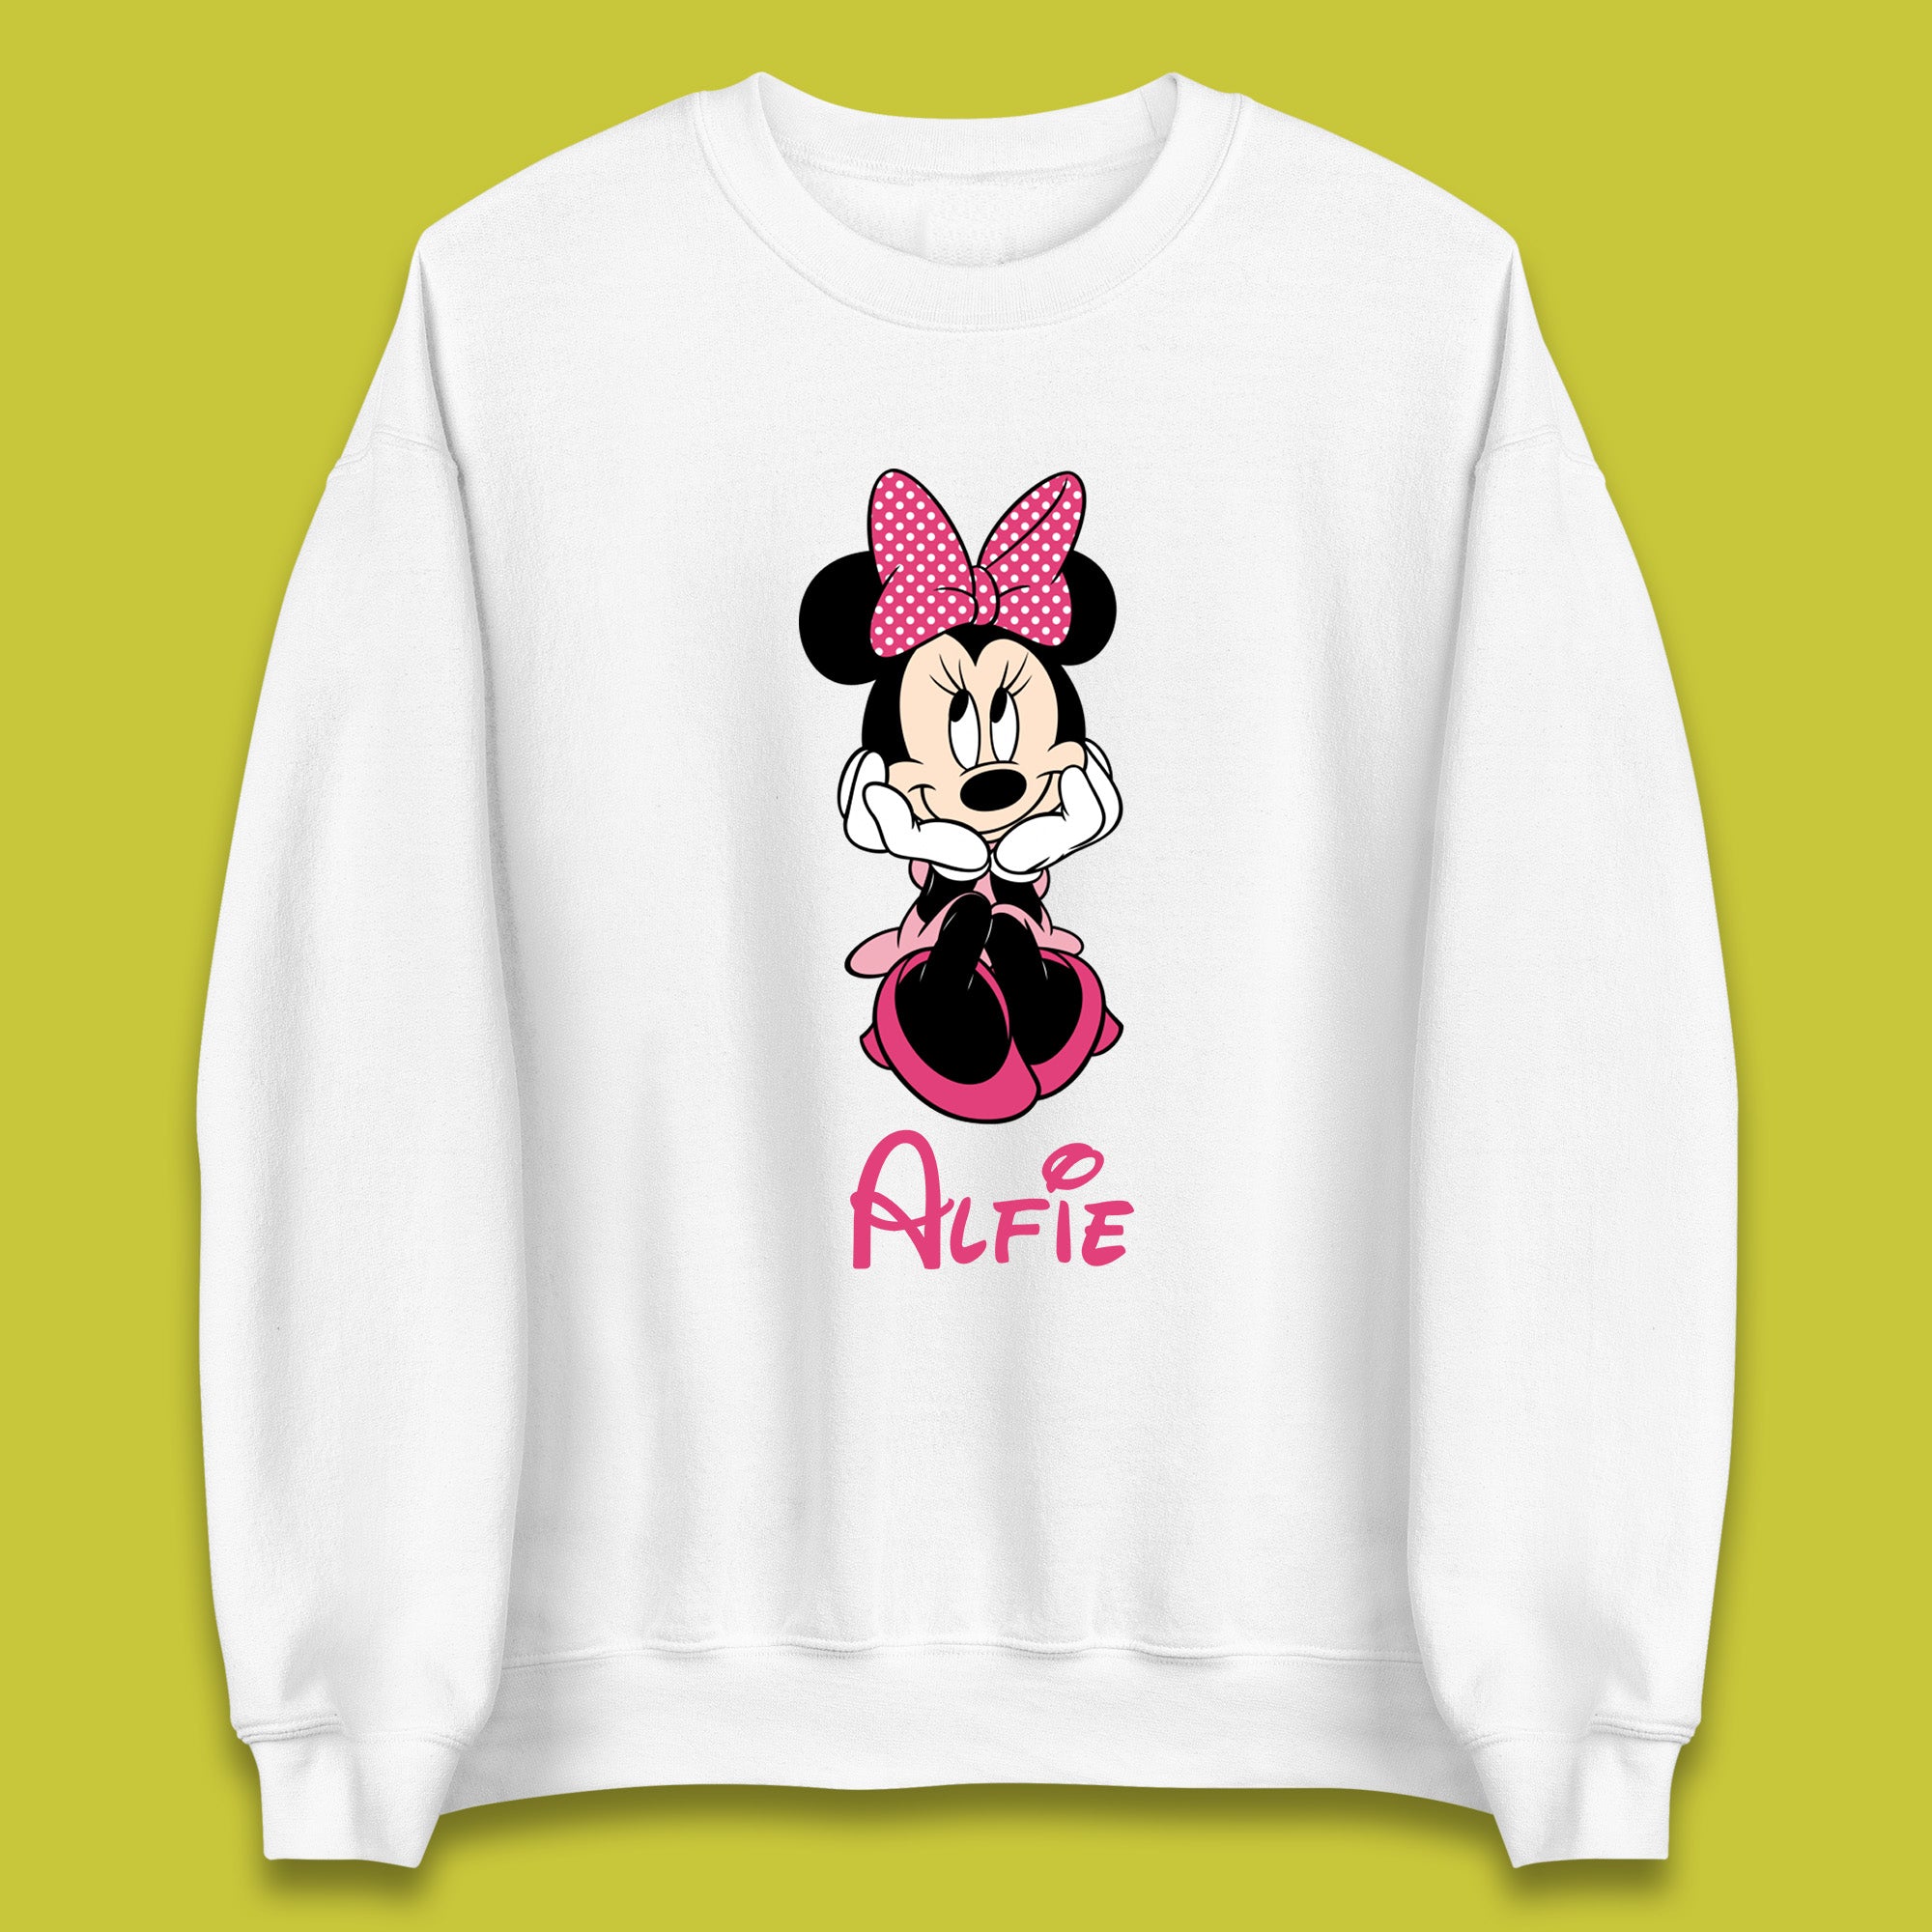 Personalised Sitting Disney Mickey Mouse Minnie Mouse Your Name Cute Cartoon Character Disney World Unisex Sweatshirt